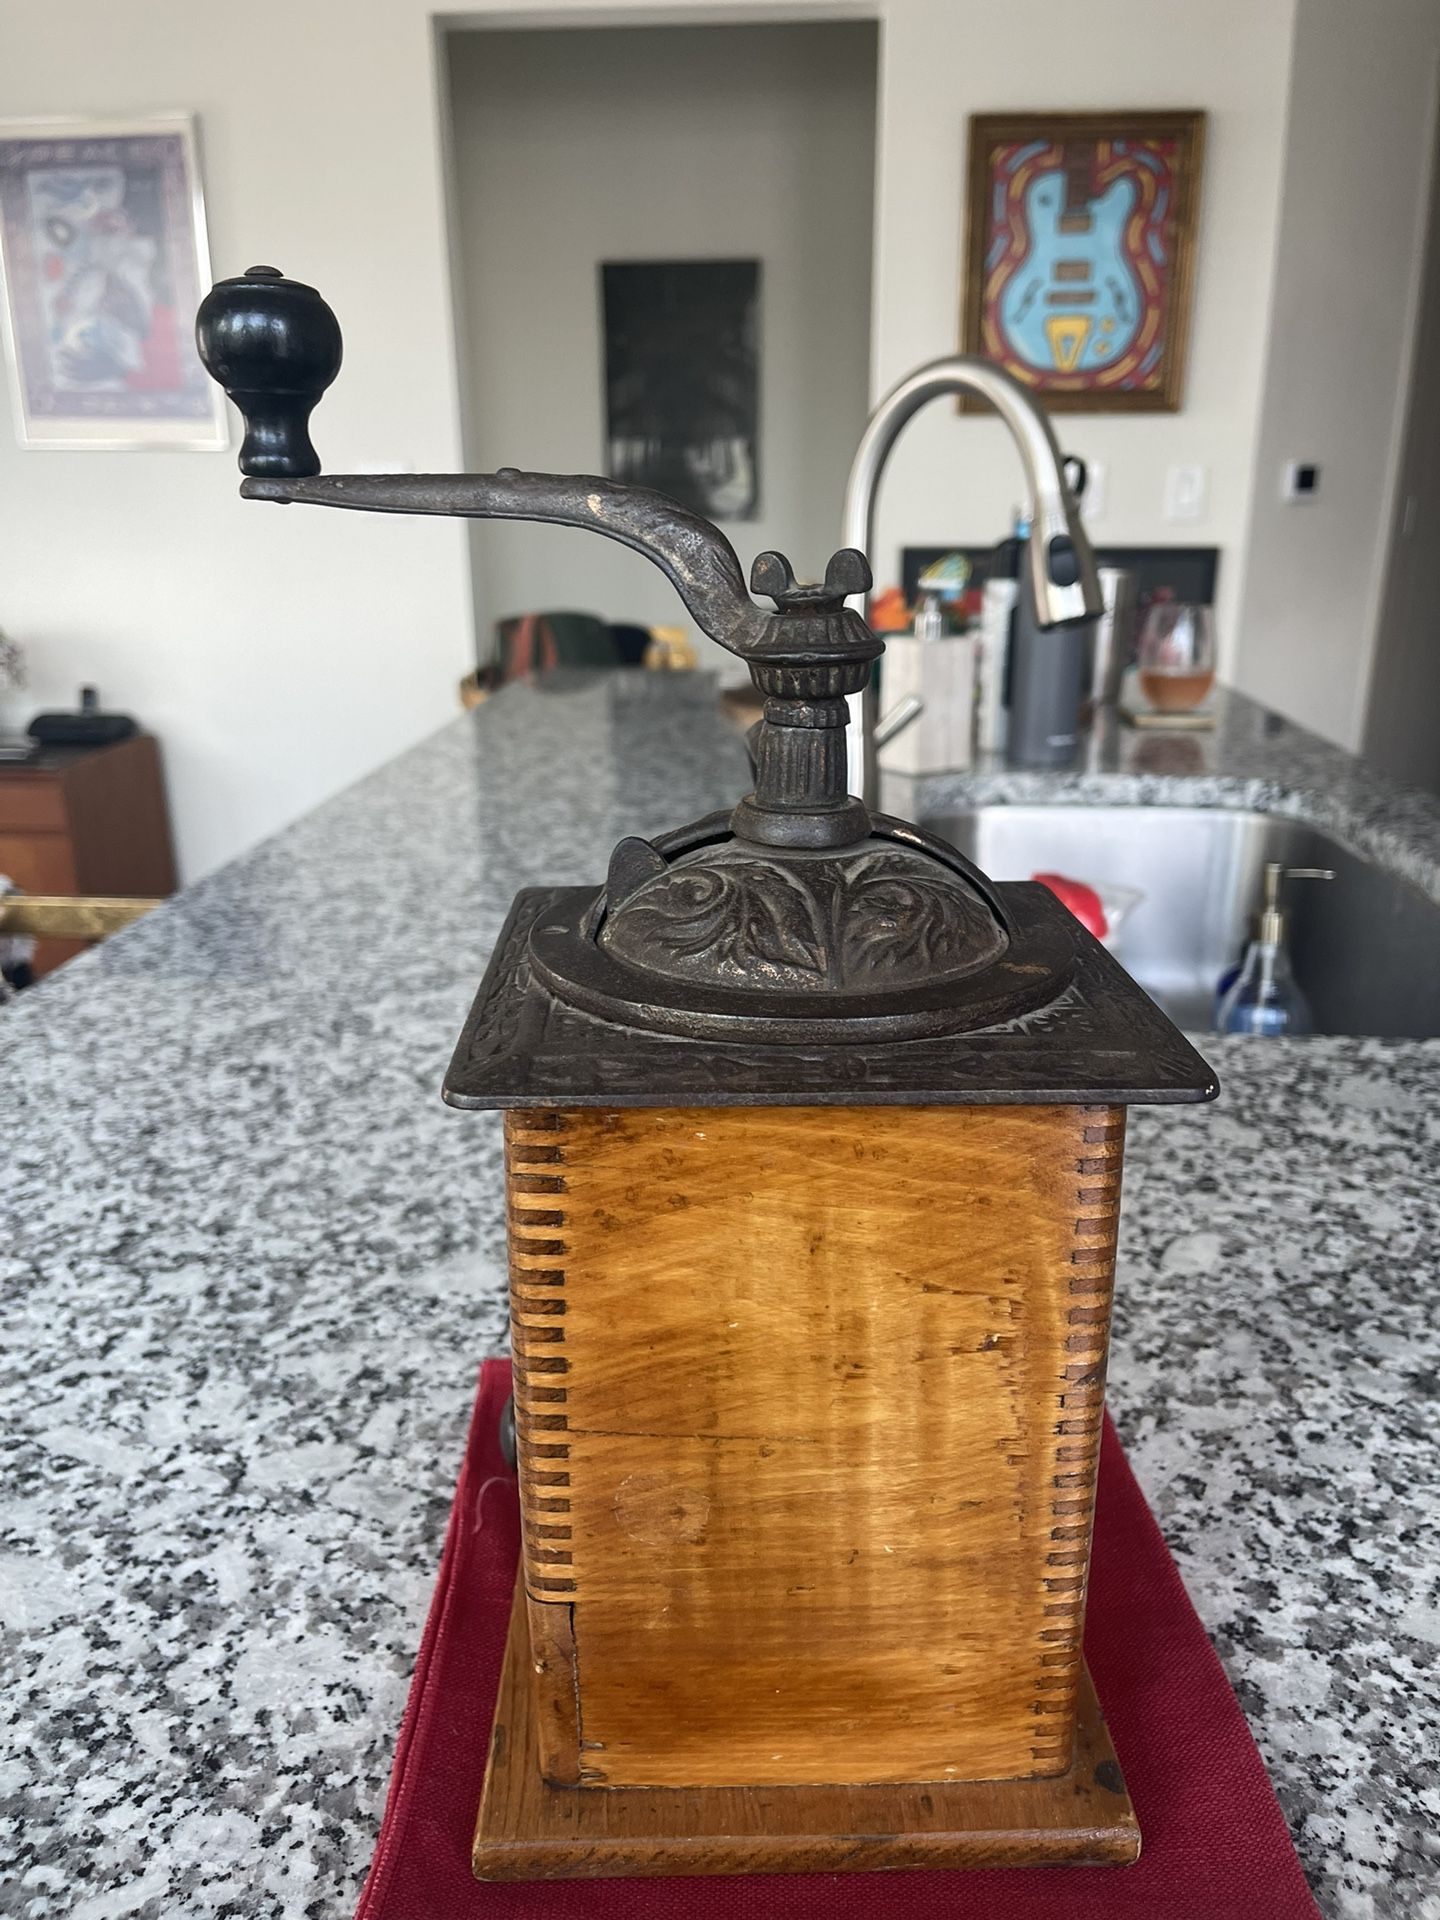 Hamilton Beach Coffee Grinder for Sale in Spring Grove, IL - OfferUp